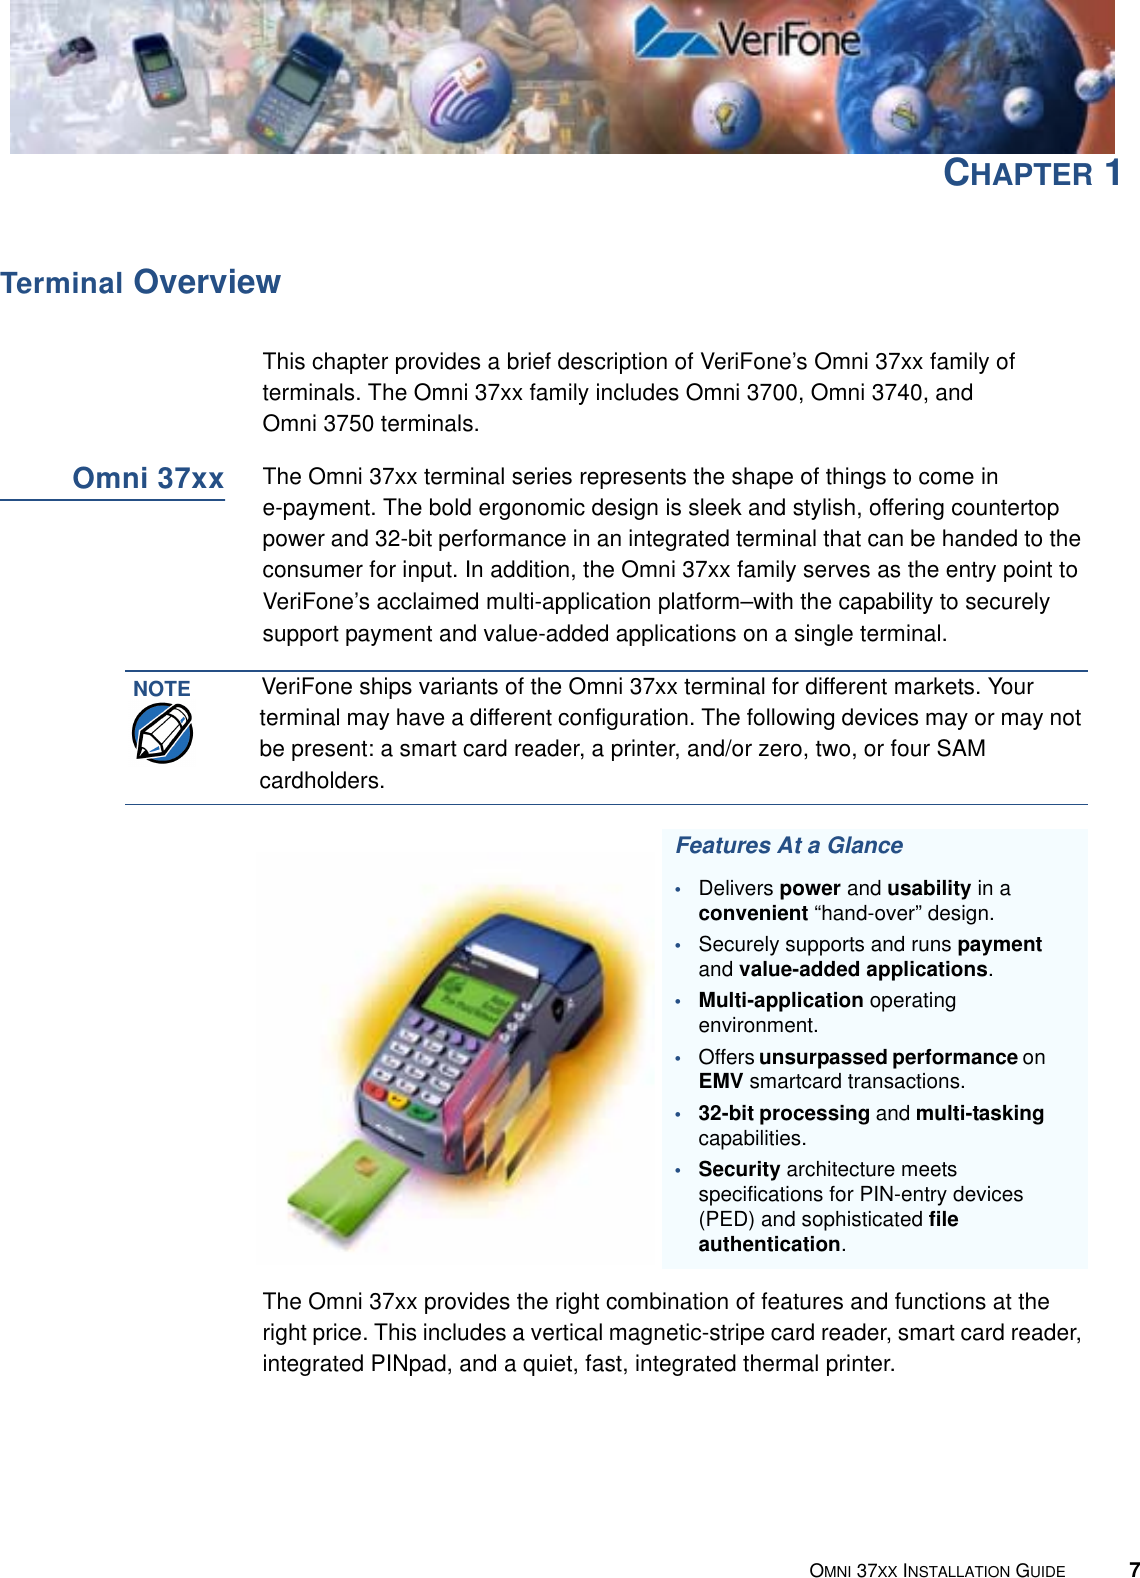 PREFACEConventions Used in This Guide6OMNI 37XX INSTALLATION GUIDEScreenText - PRE ScreenText format is used while specifying onscreen text, such as text that you would enter at a command prompt, or to provide an URL.http://www.verifone.comThe pencil icon is used to highlight important information.RS232-type devices do not work with the PIN Pad port.The caution symbol indicates hardware or software failure, or loss of data.The terminal is not waterproof or dustproof, and is intended for indoor use only.The lighting symbol is used as a warning when bodily injury might occur.Due to risk of shock do not use the terminal near water.Table 1 Document Conventions  (continued)Convention Meaning ExampleNOTECAUTIONWARNING